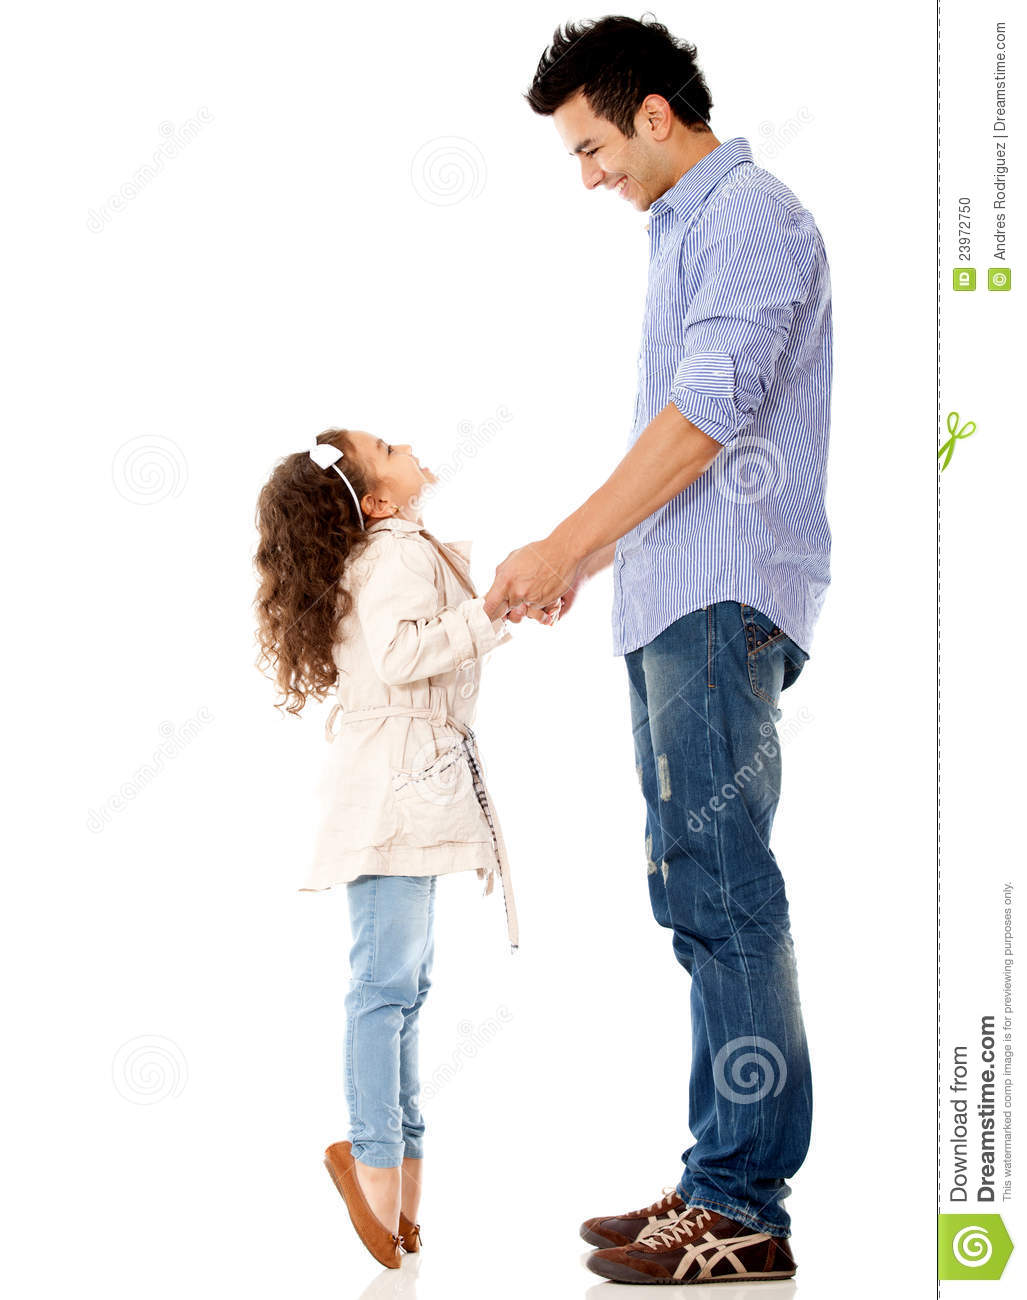 Girl Reaching Her Dad   Isolated Over A White Background